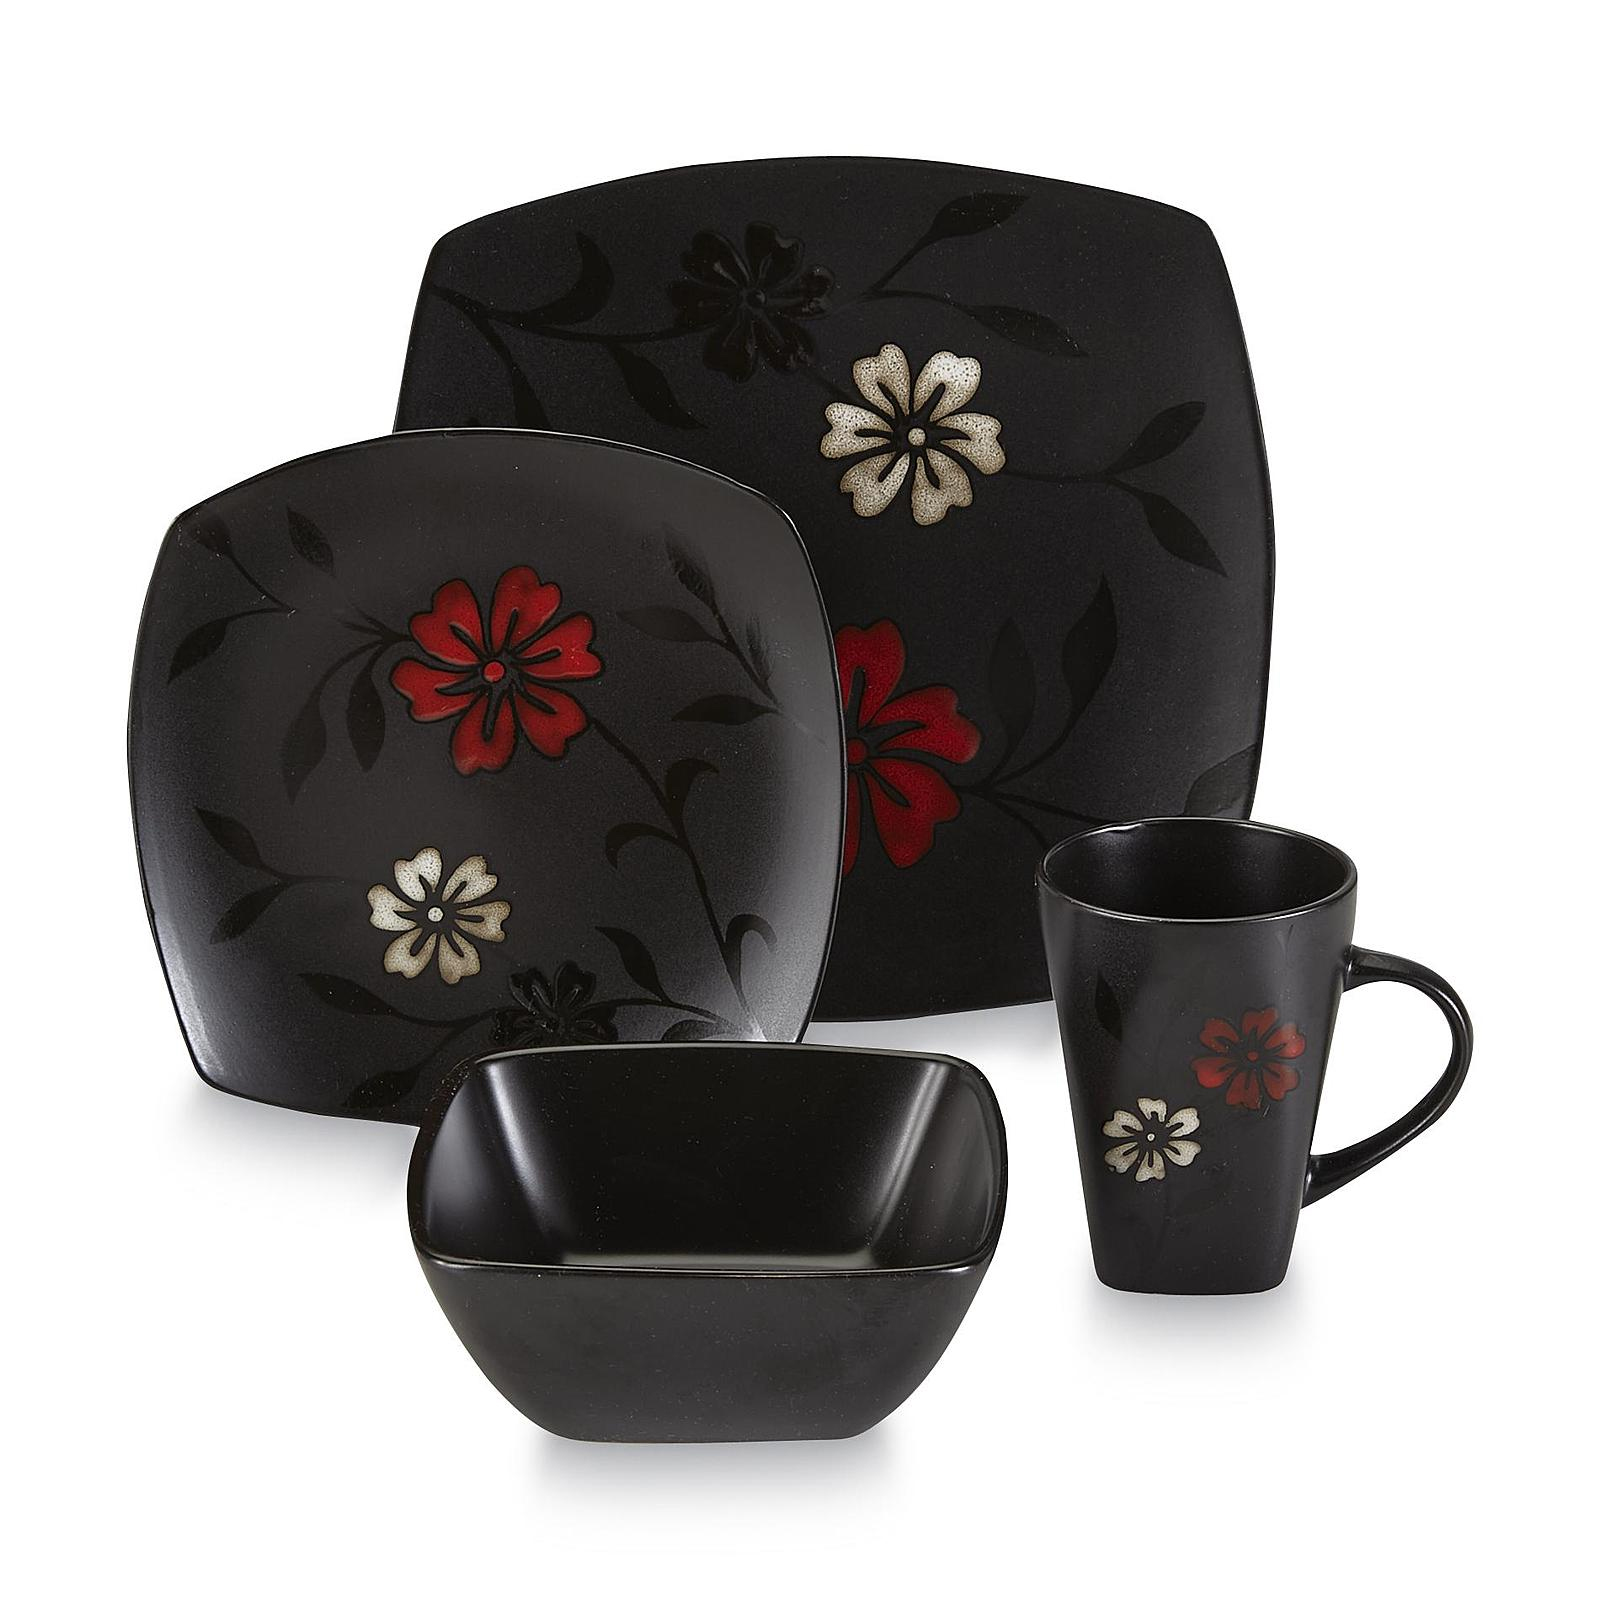 Gibsons Essential Home Mystic Floral 16pc Dinnerware Set - image 1 of 2